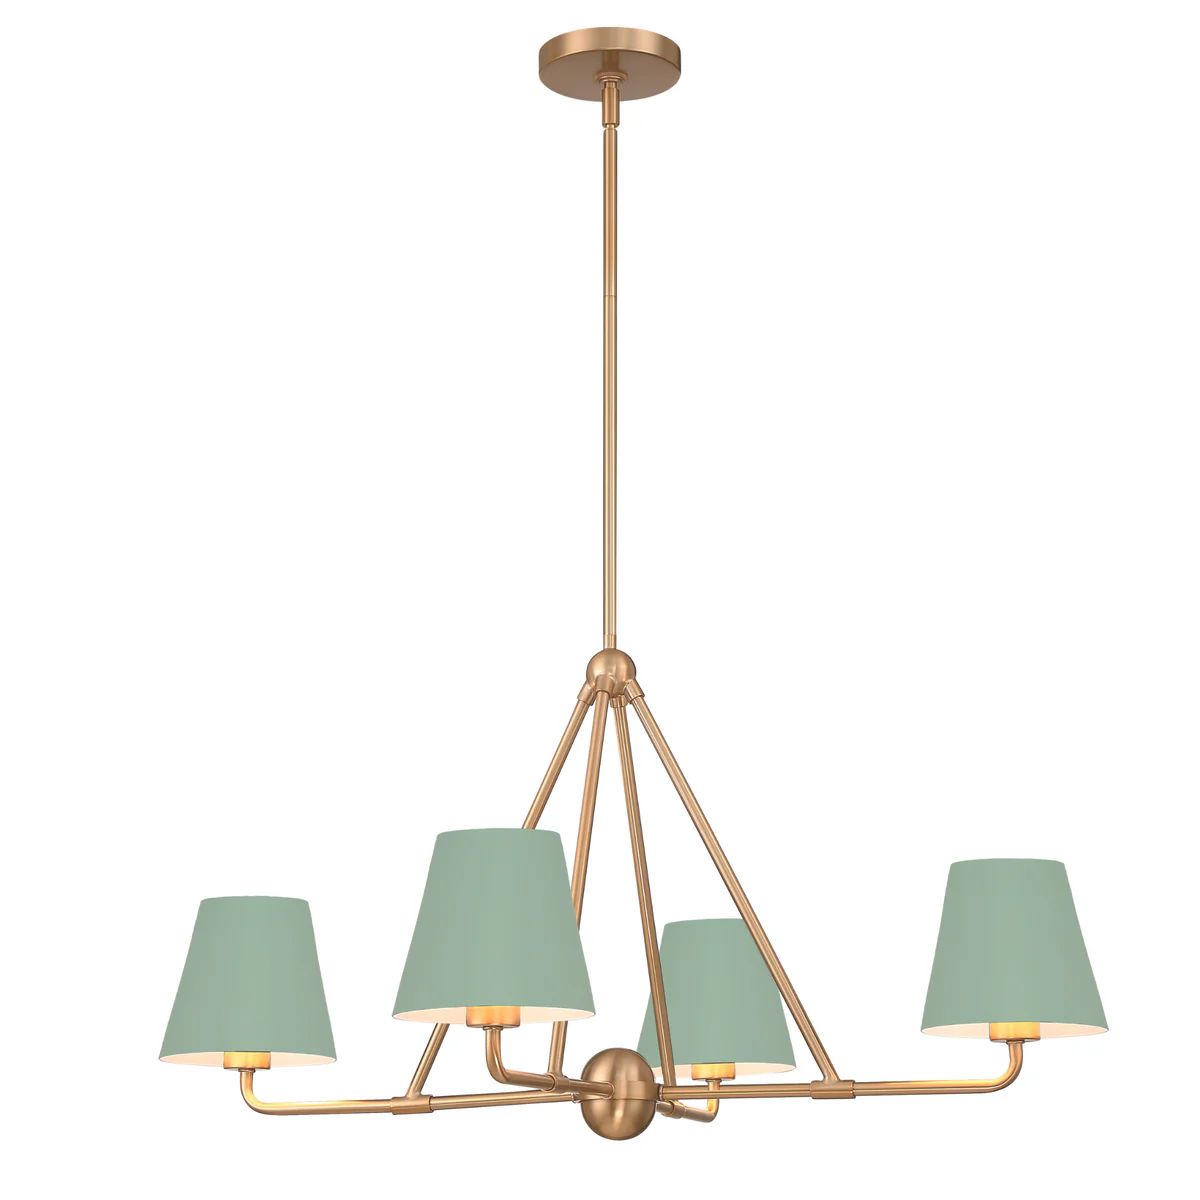 Xavier 4 Light Chandelier in Sage Green | The Well Appointed House, LLC